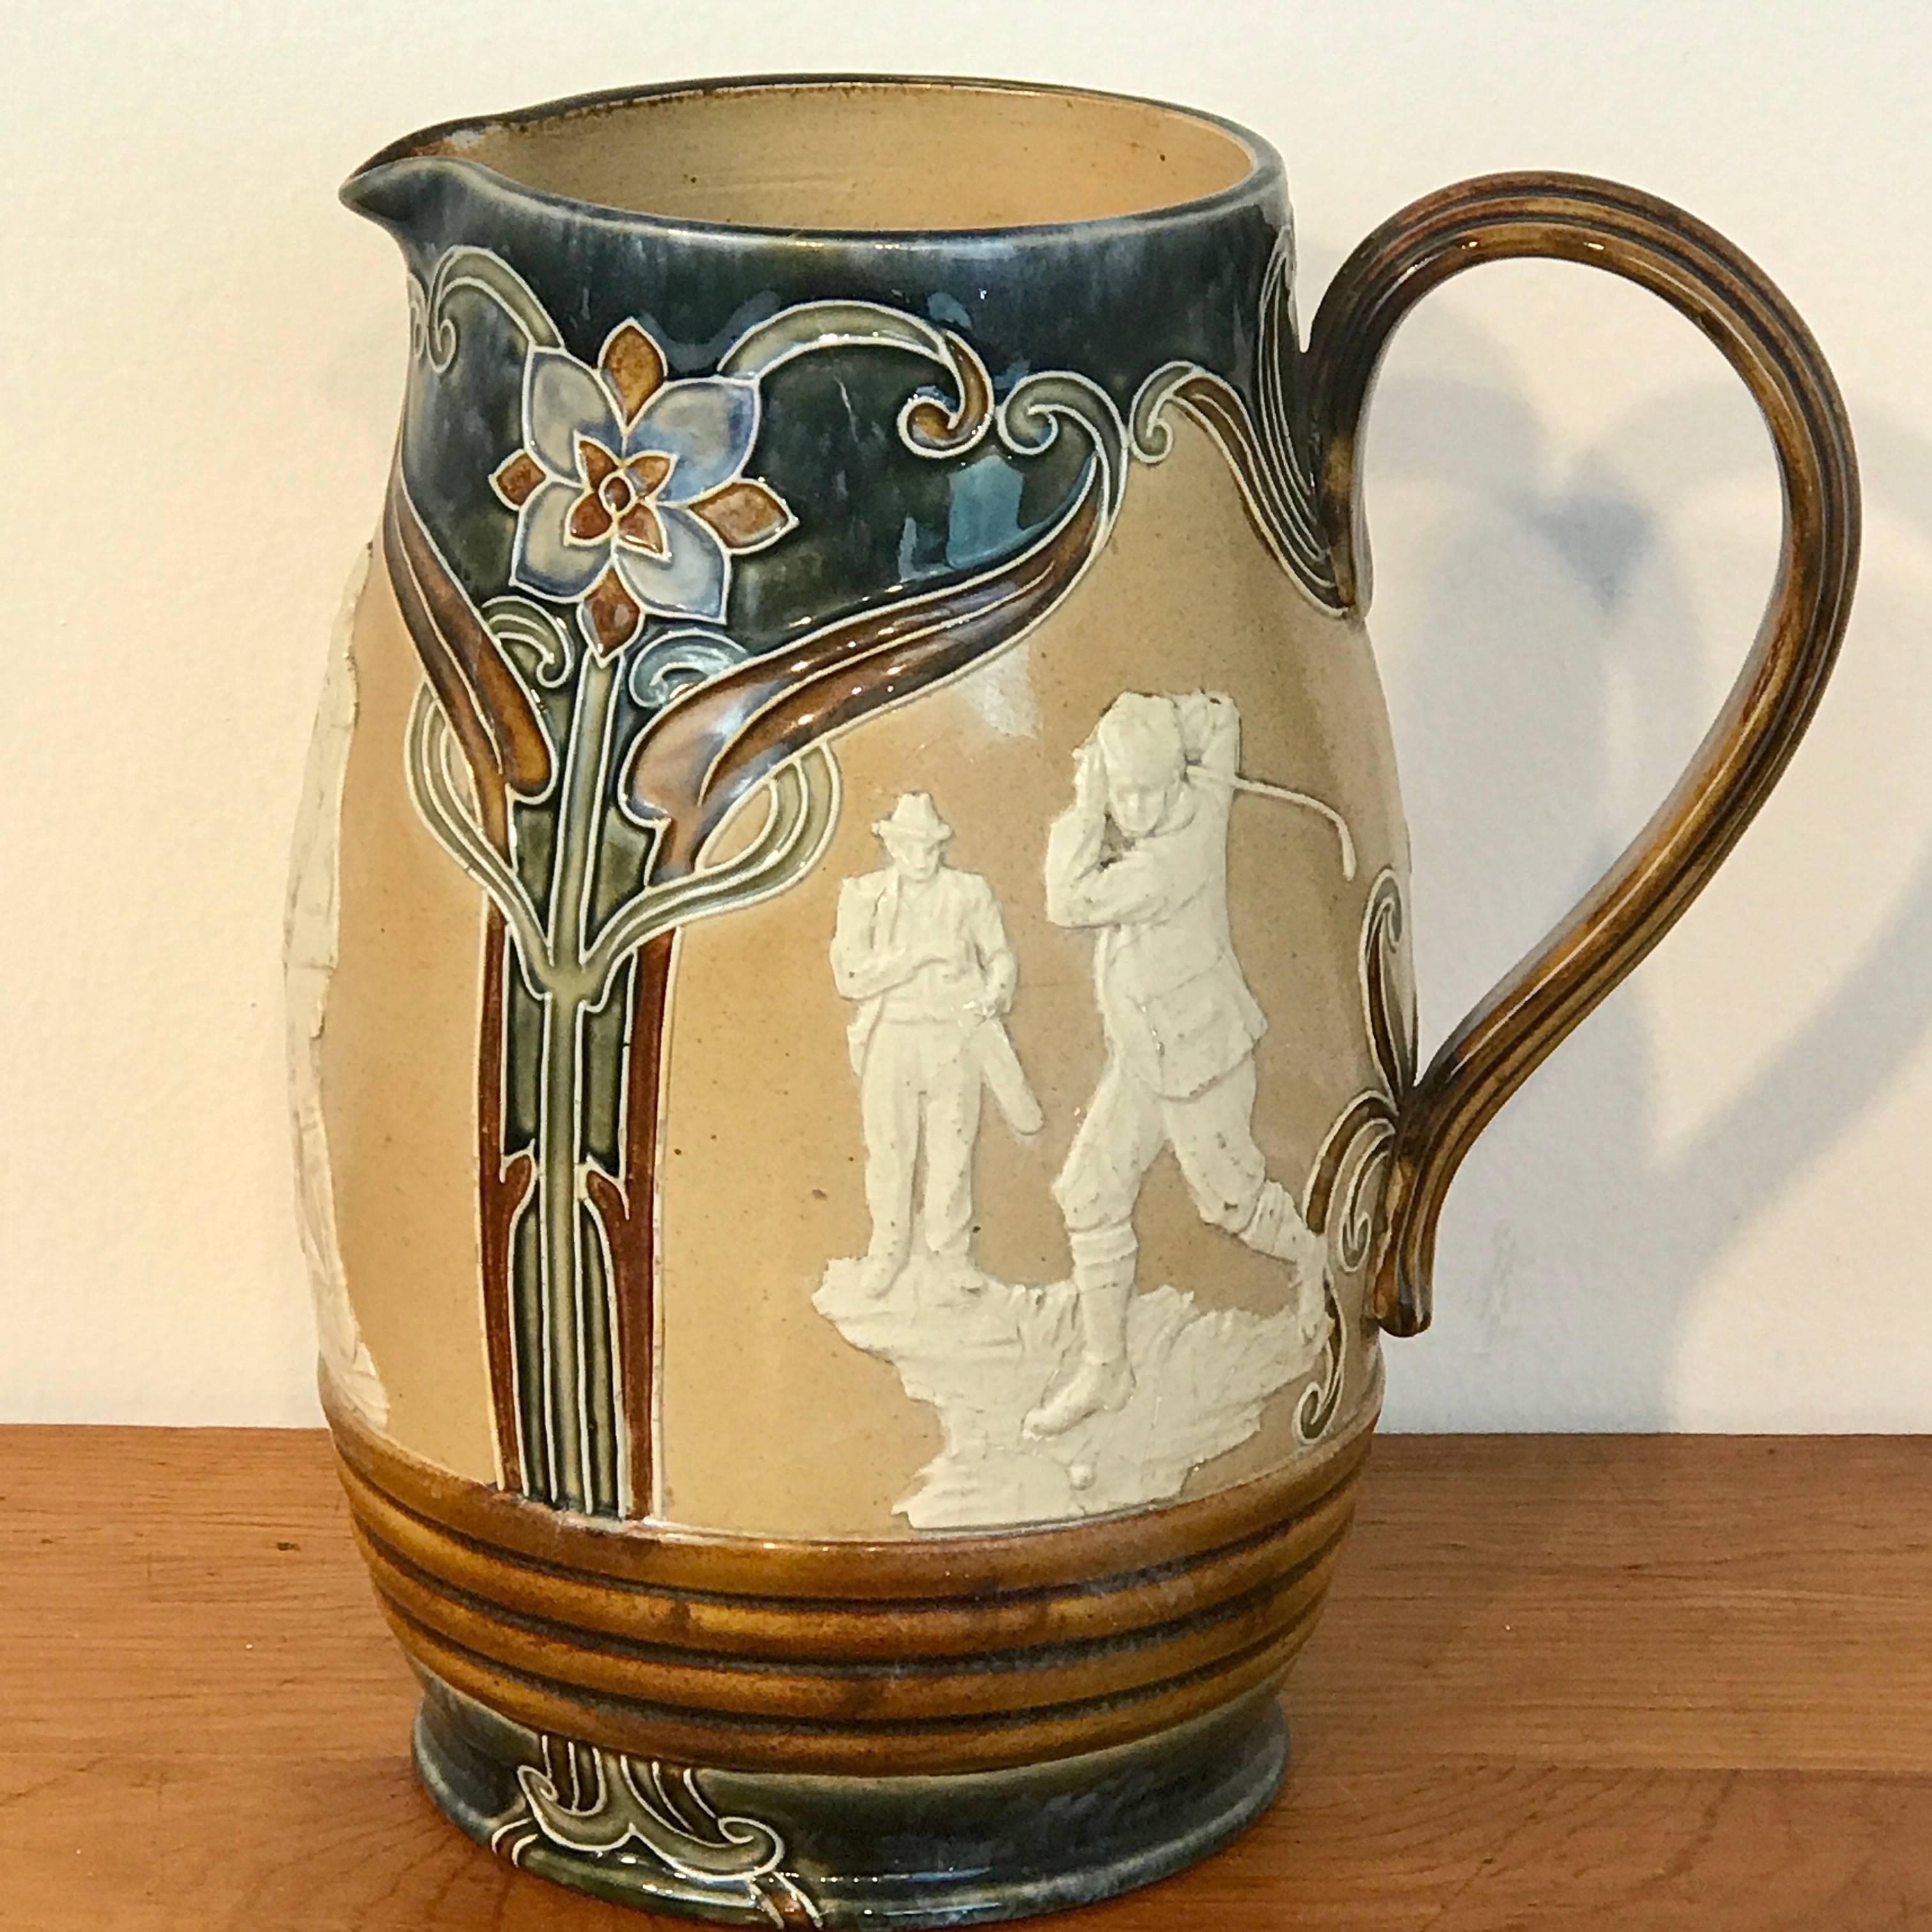 A Royal Doulton Lambeth Art Nouveau stoneware jug with three golf vignettes, Stamped 'Doulton Lambeth England #166 and incised initials 'P'B. The pitcher stands 9.5